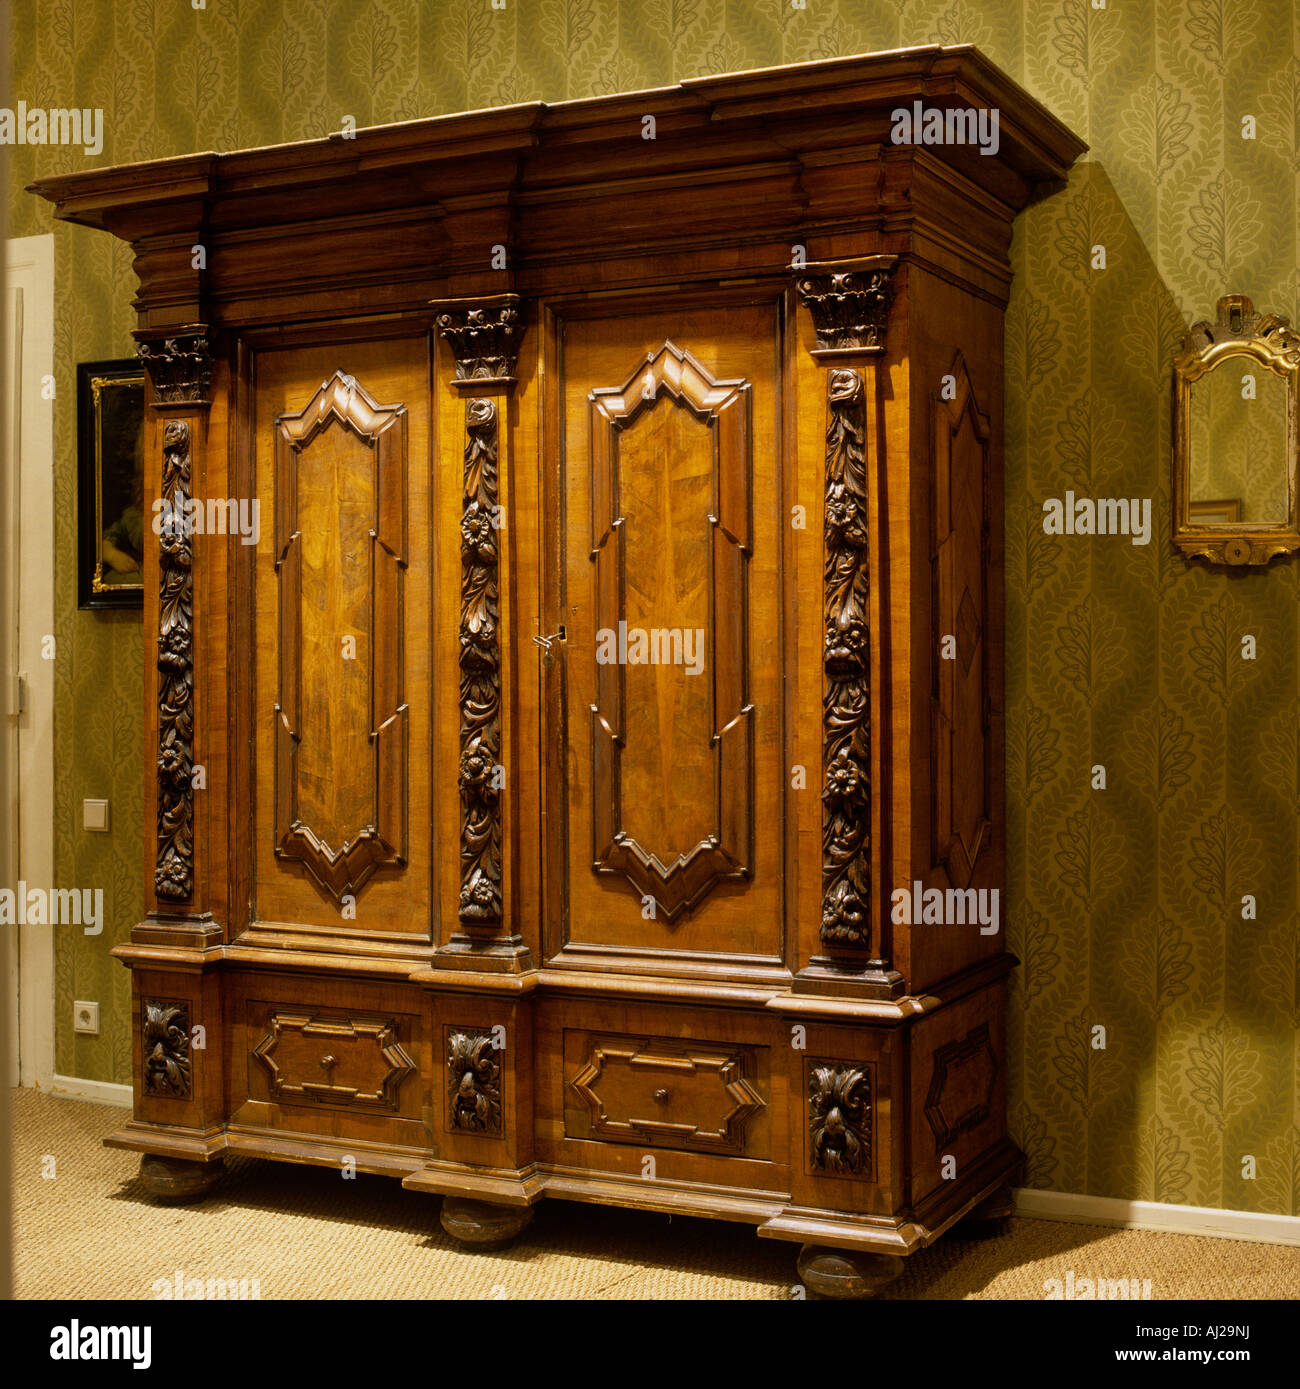 Ornate antique wooden wardrobe with green patterned wallpaper behind in  historic German stately home Stock Photo - Alamy